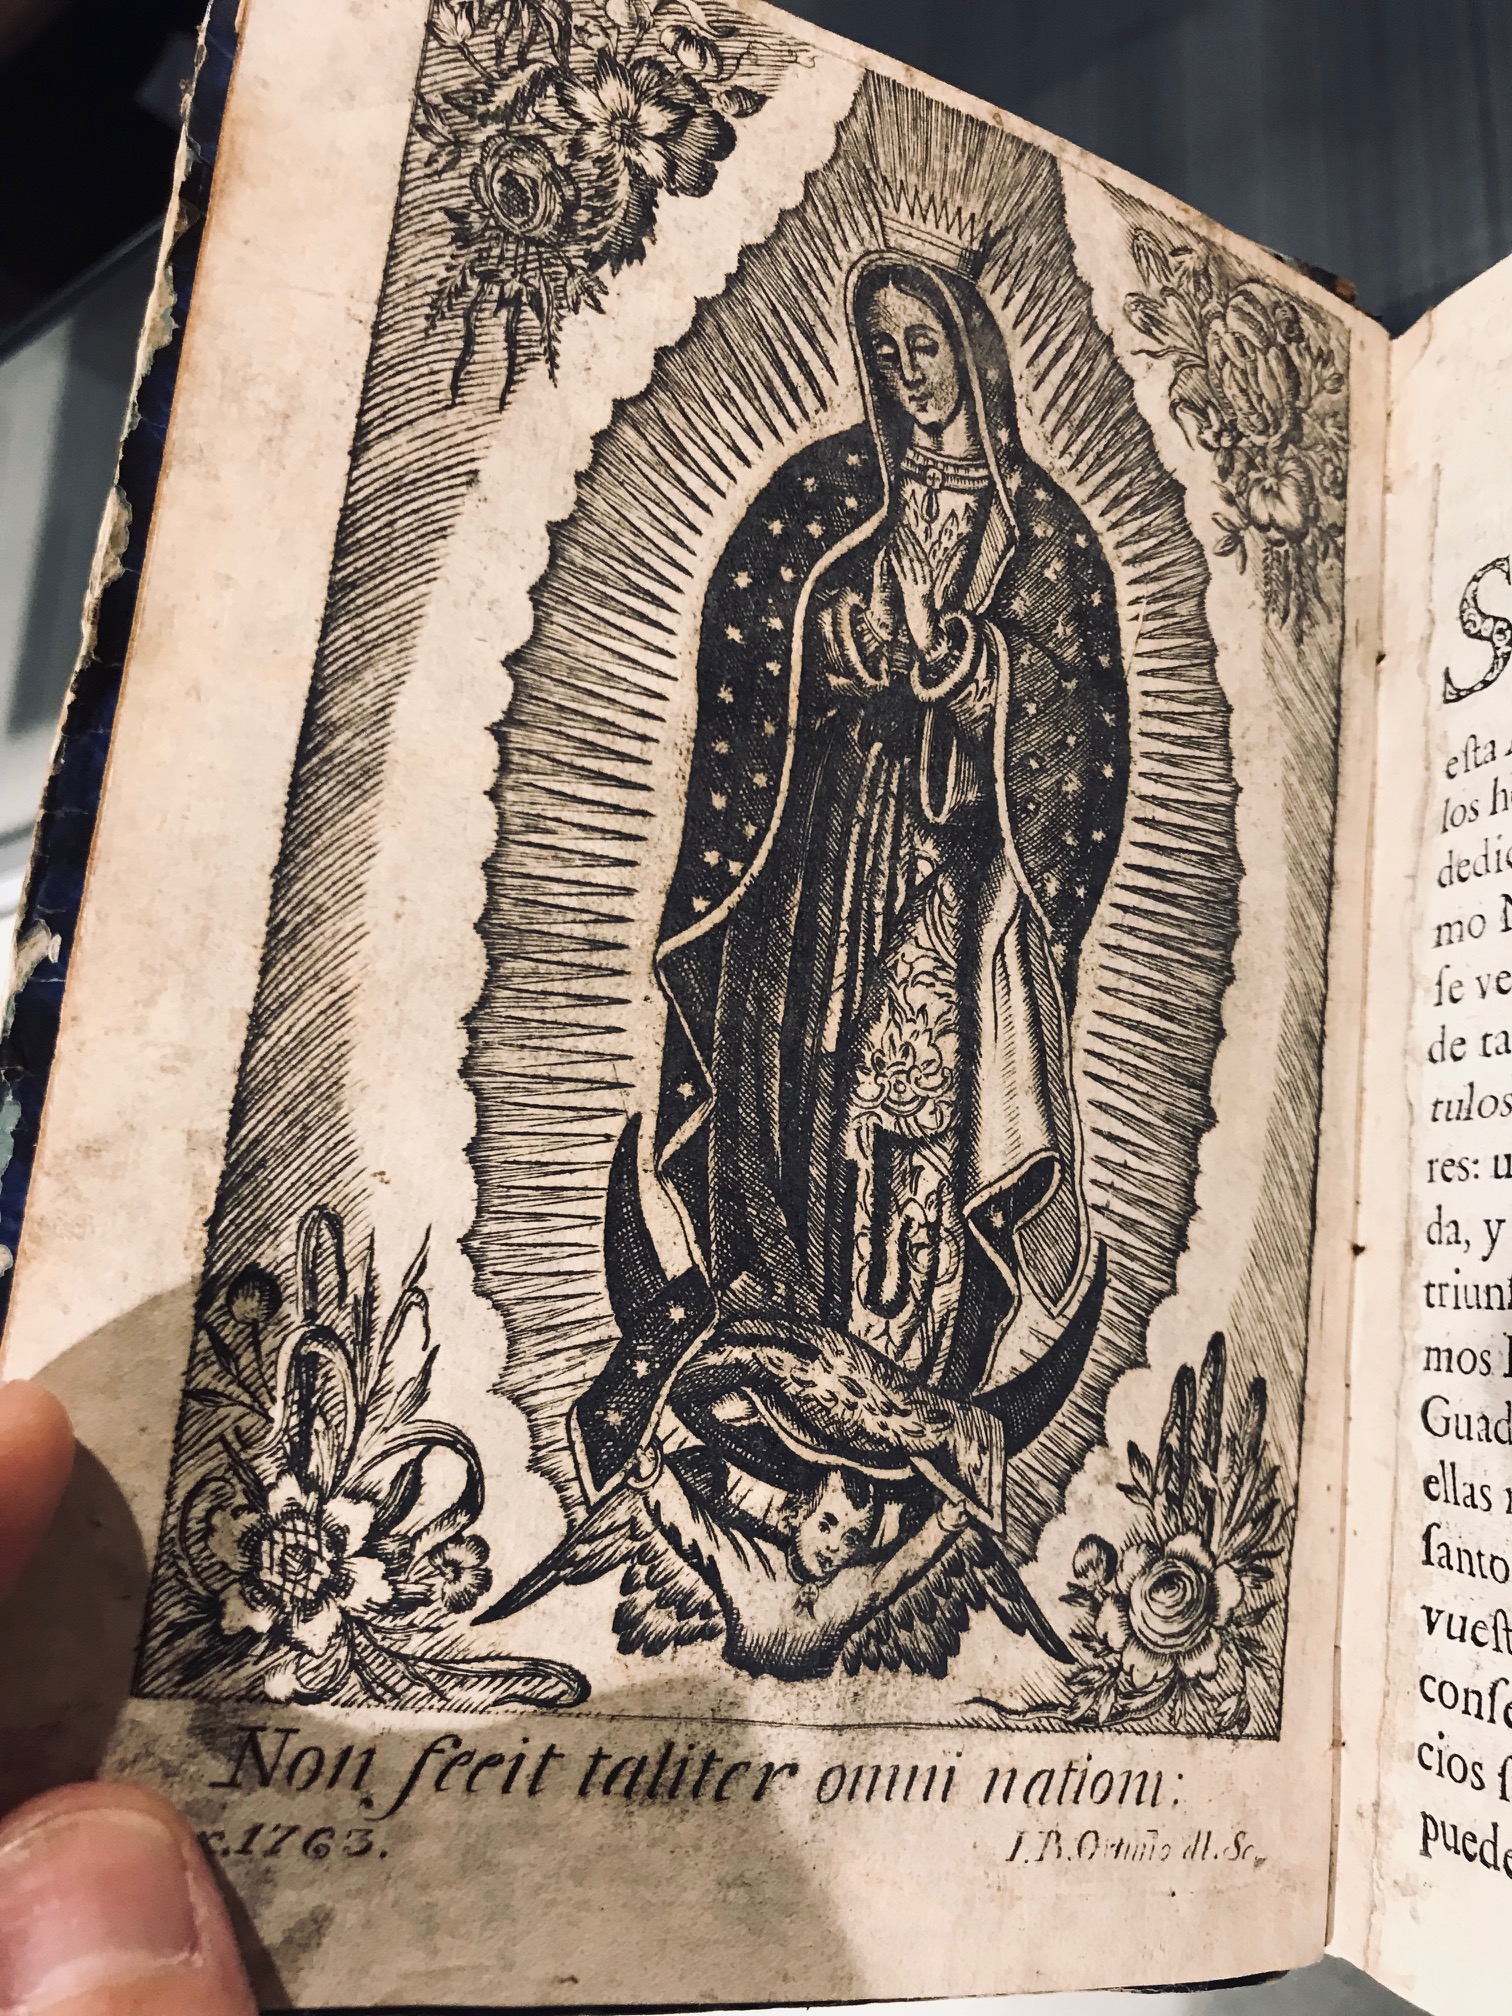 An eighteenth-century reader added a bit of flair to a copy of Francisco de Florencia’s Zodiaco mariano (Mexico City, 1755) by inserting an engraving of the Virgin of Guadalupe to enhance the book’s subject matter: to help identify miraculous images of Mary in New Spain.